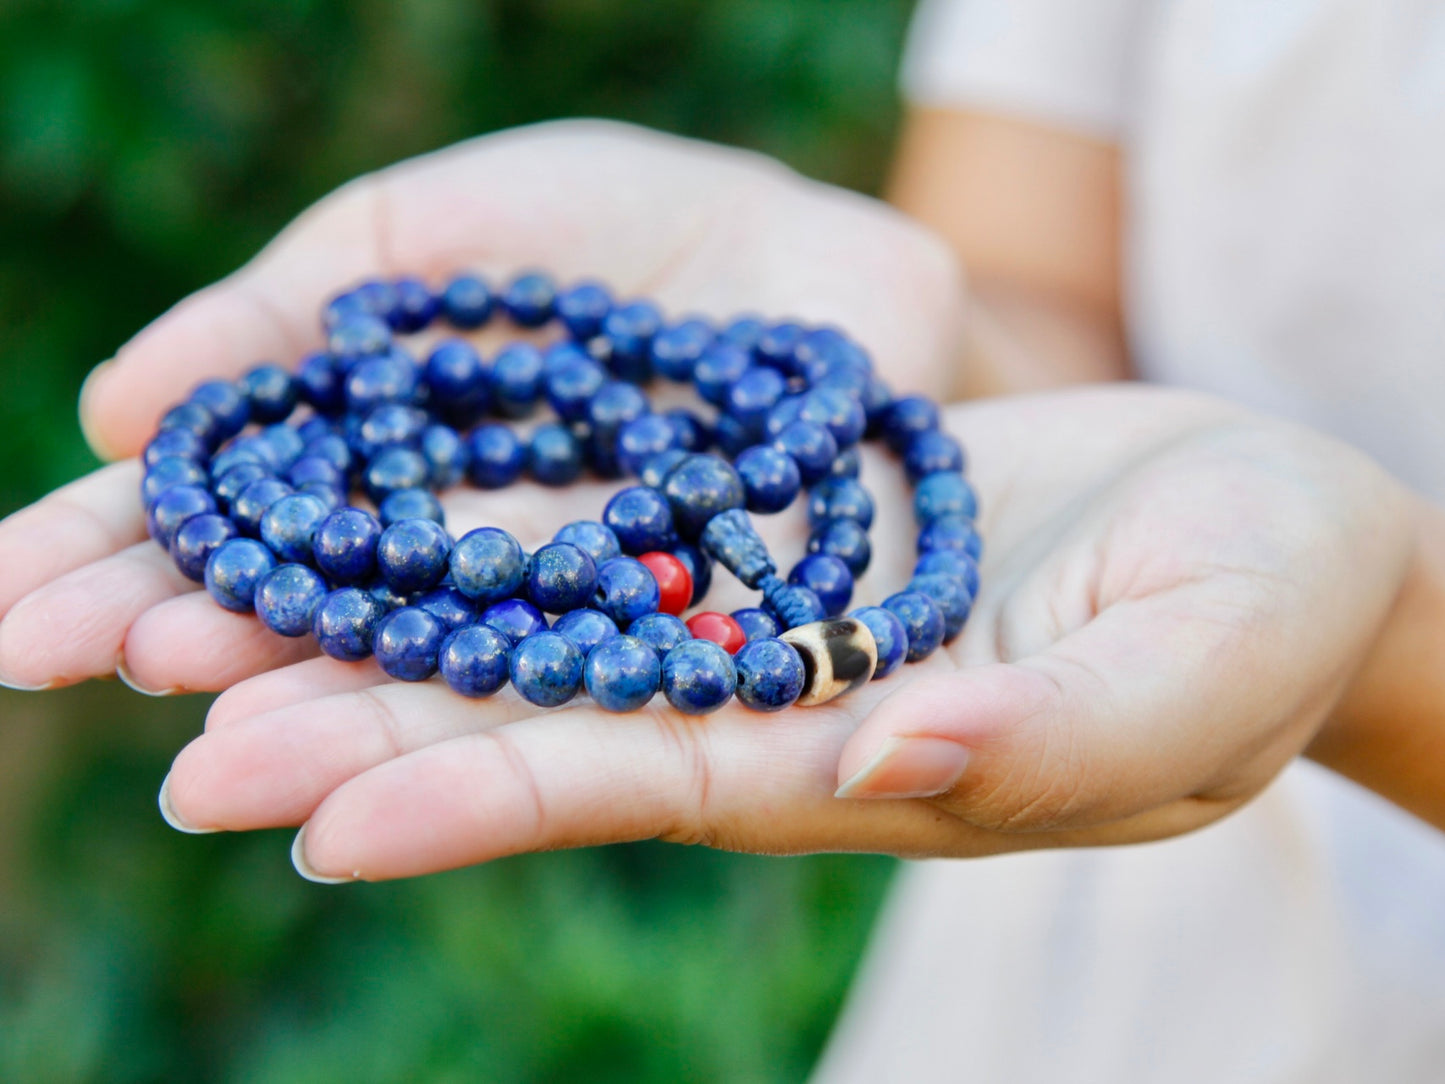 lapis mala rounded up in palm of hands